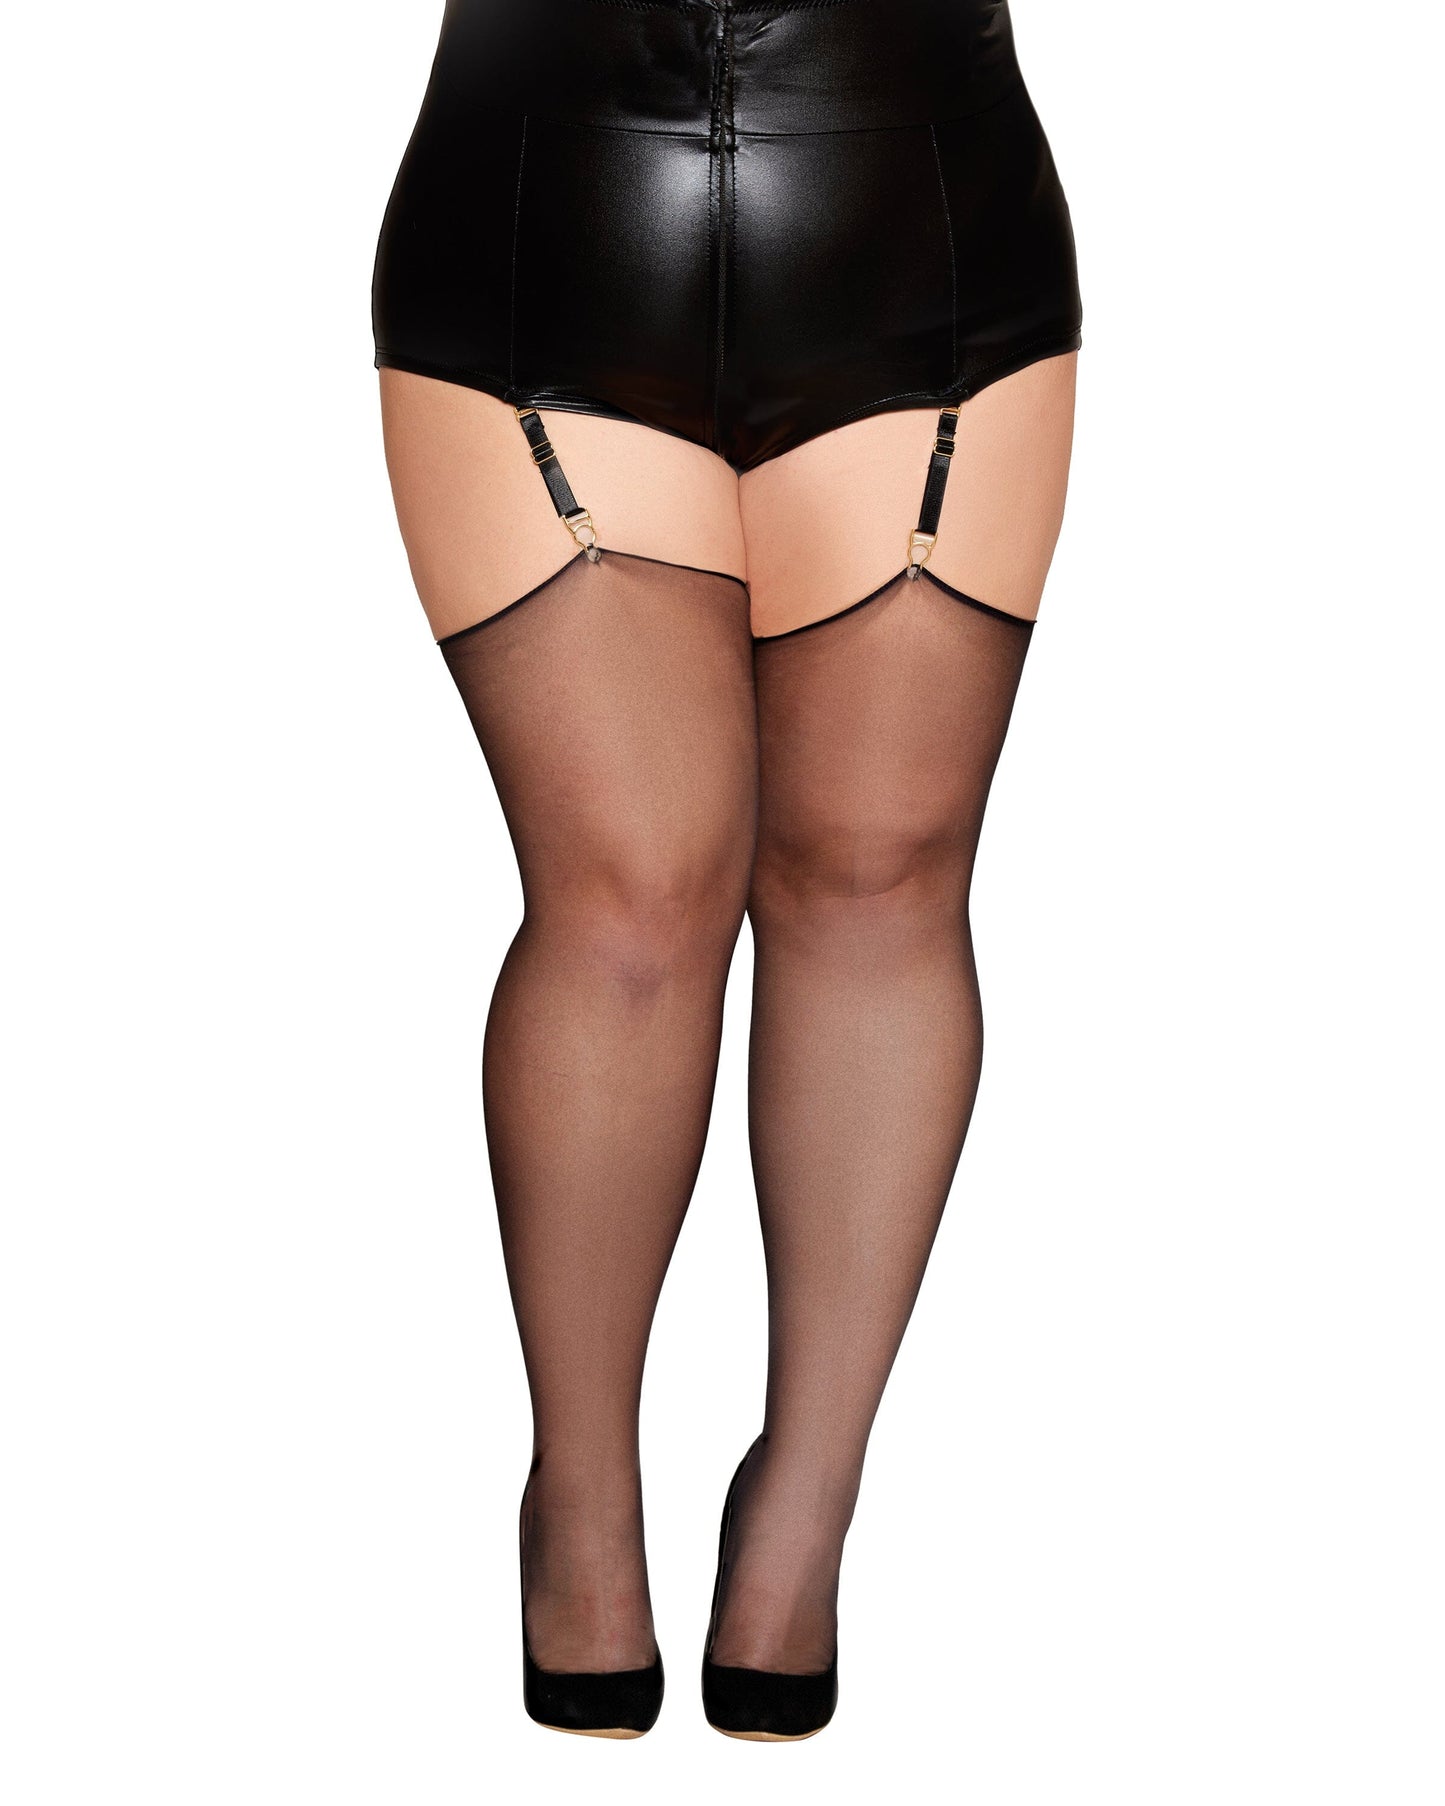 Plus Size Silky Sheer Thigh Highs - Black with Reversable Backseam